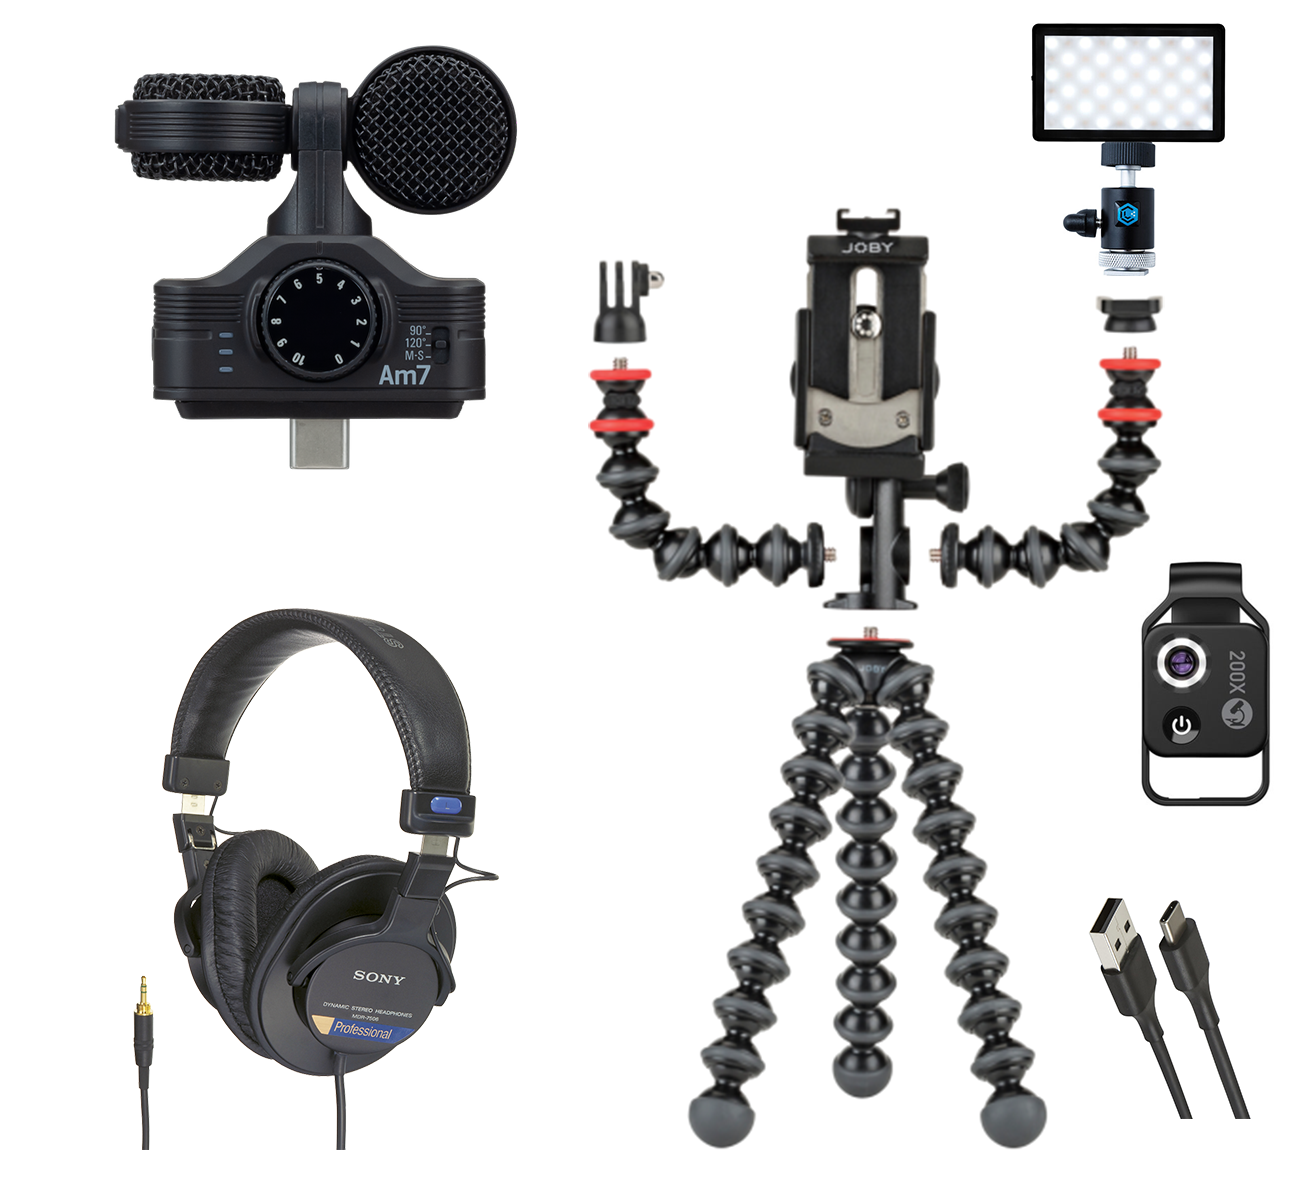 Image of all items included in the kit